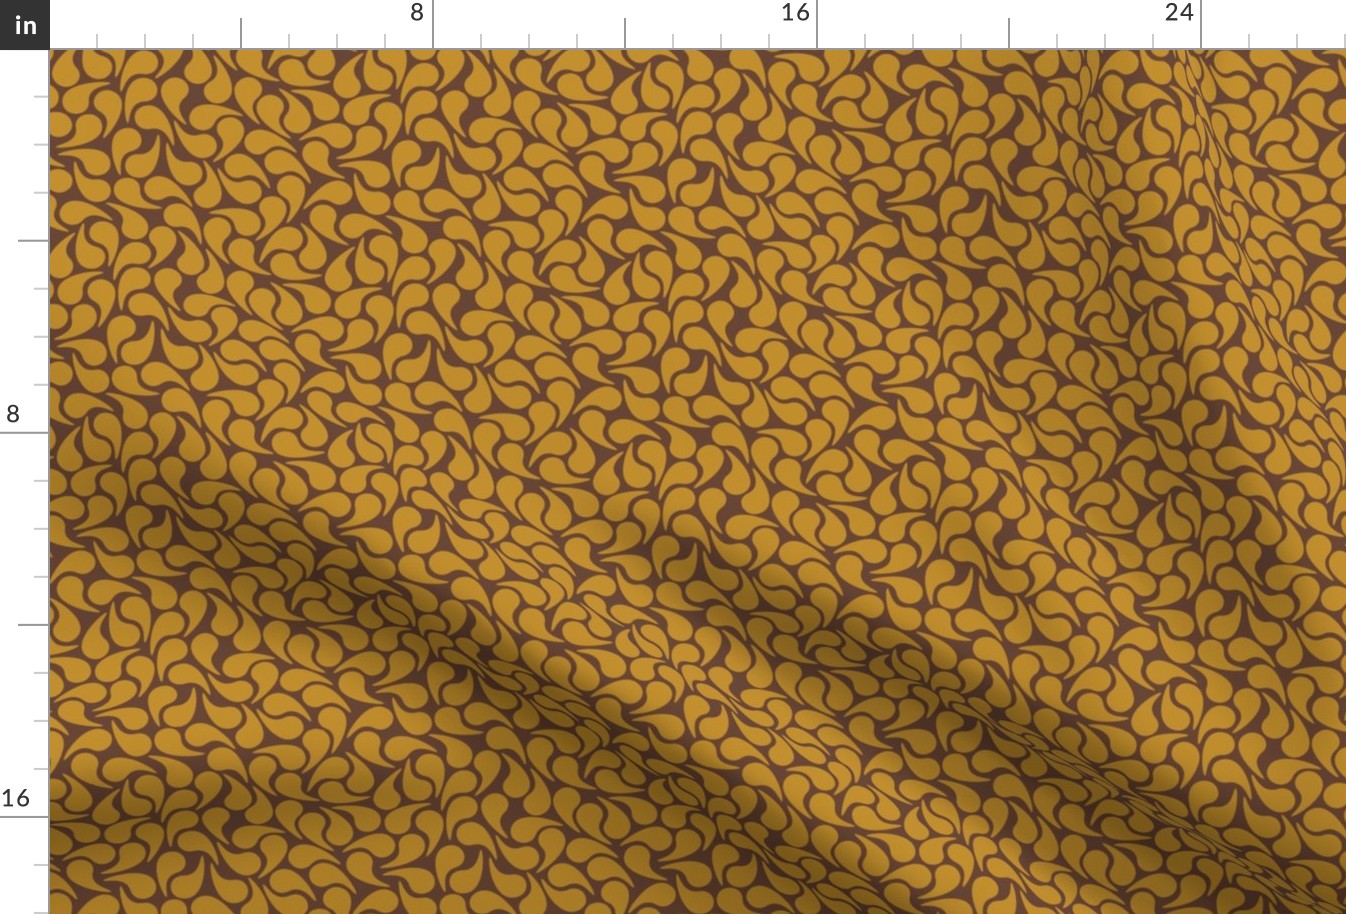 Droplets -- Gold on Brown Groovy Abstract Graphic Geometric Paisley Shape